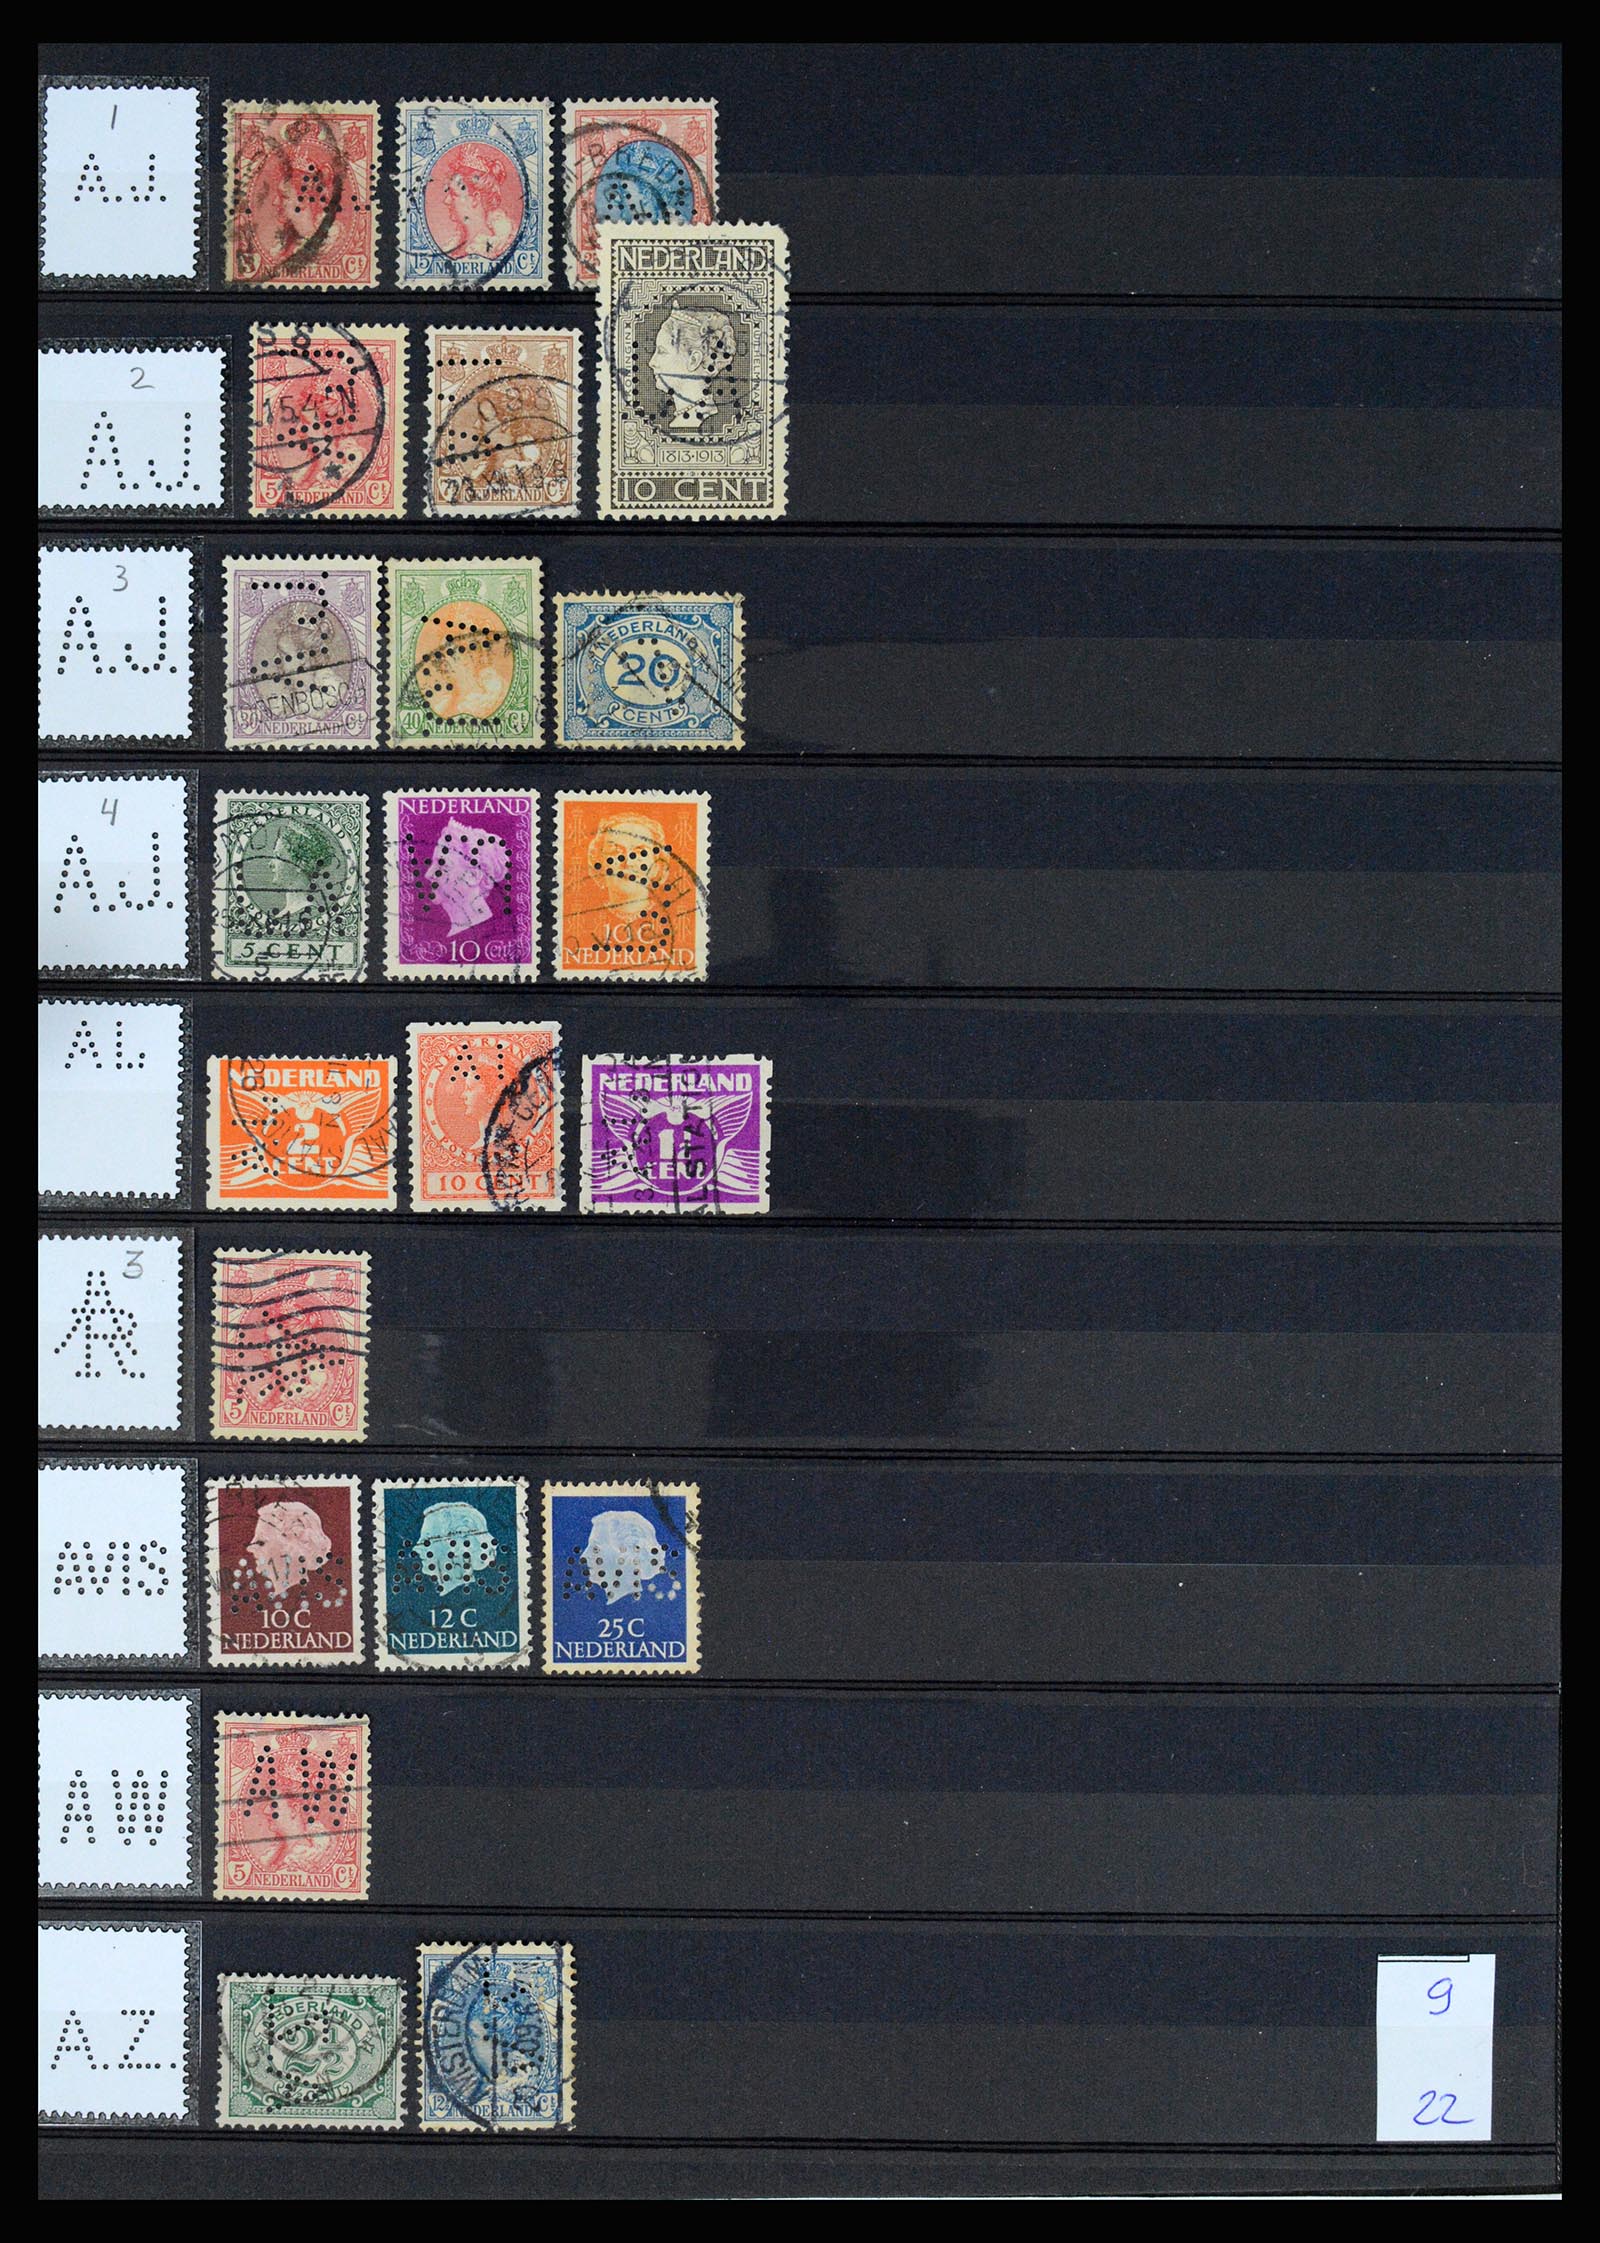 37183 003 - Stamp collection 37183 Netherlands perfins 1872-1960.